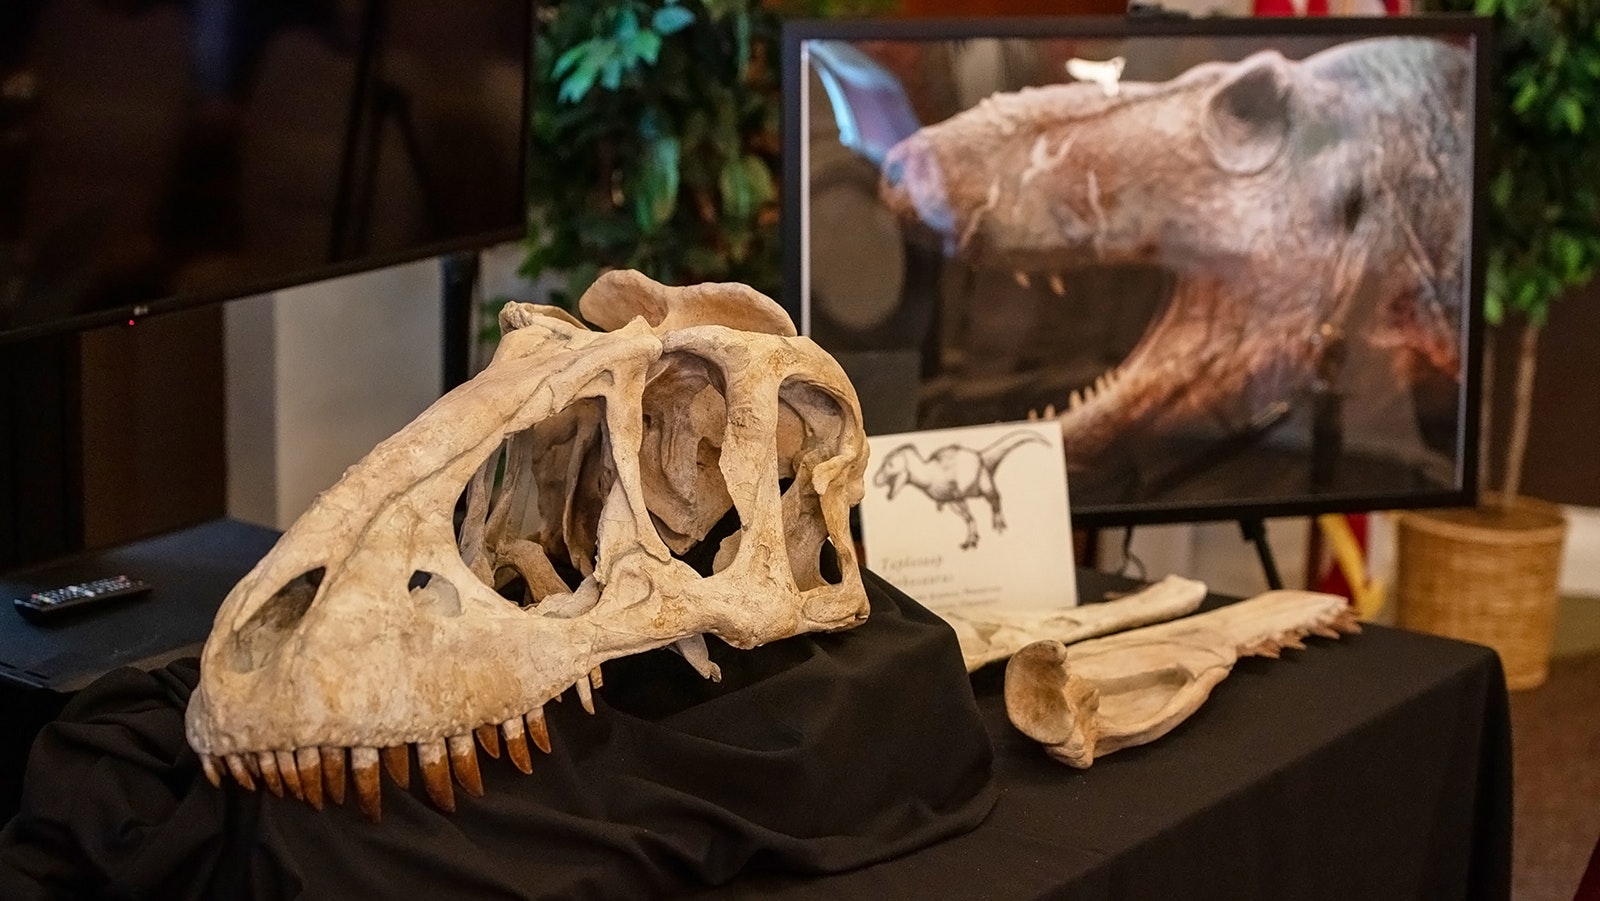 The skull of Tarbosaurus bataar on display in the Library of Congress. The discovery of this skull in Wyoming was part of multiple investigations by Homeland Security in three states, which resulted in the seizure and repatriation of several illegally imported Mongolian fossils.